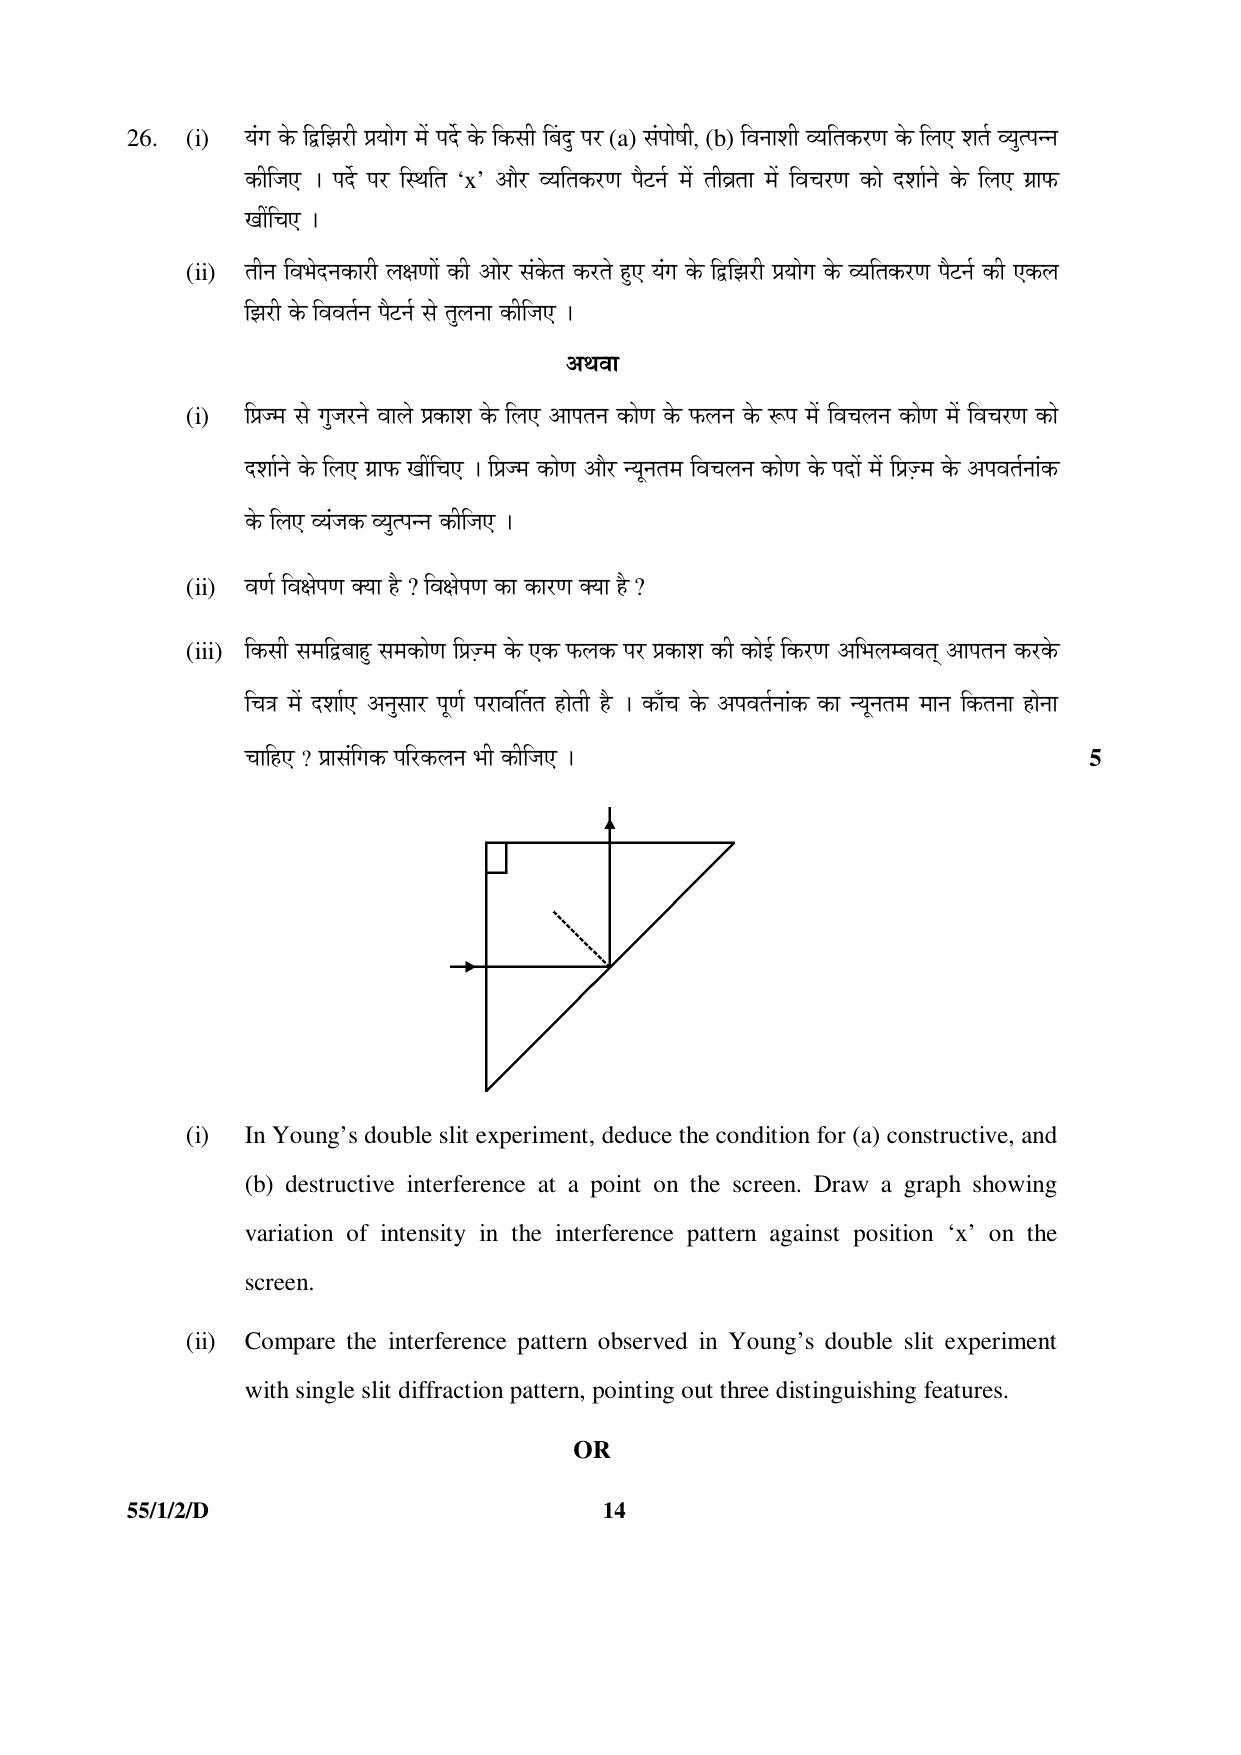 CBSE Class 12 55-1-2-D PHYSICS 2016 Question Paper - Page 14